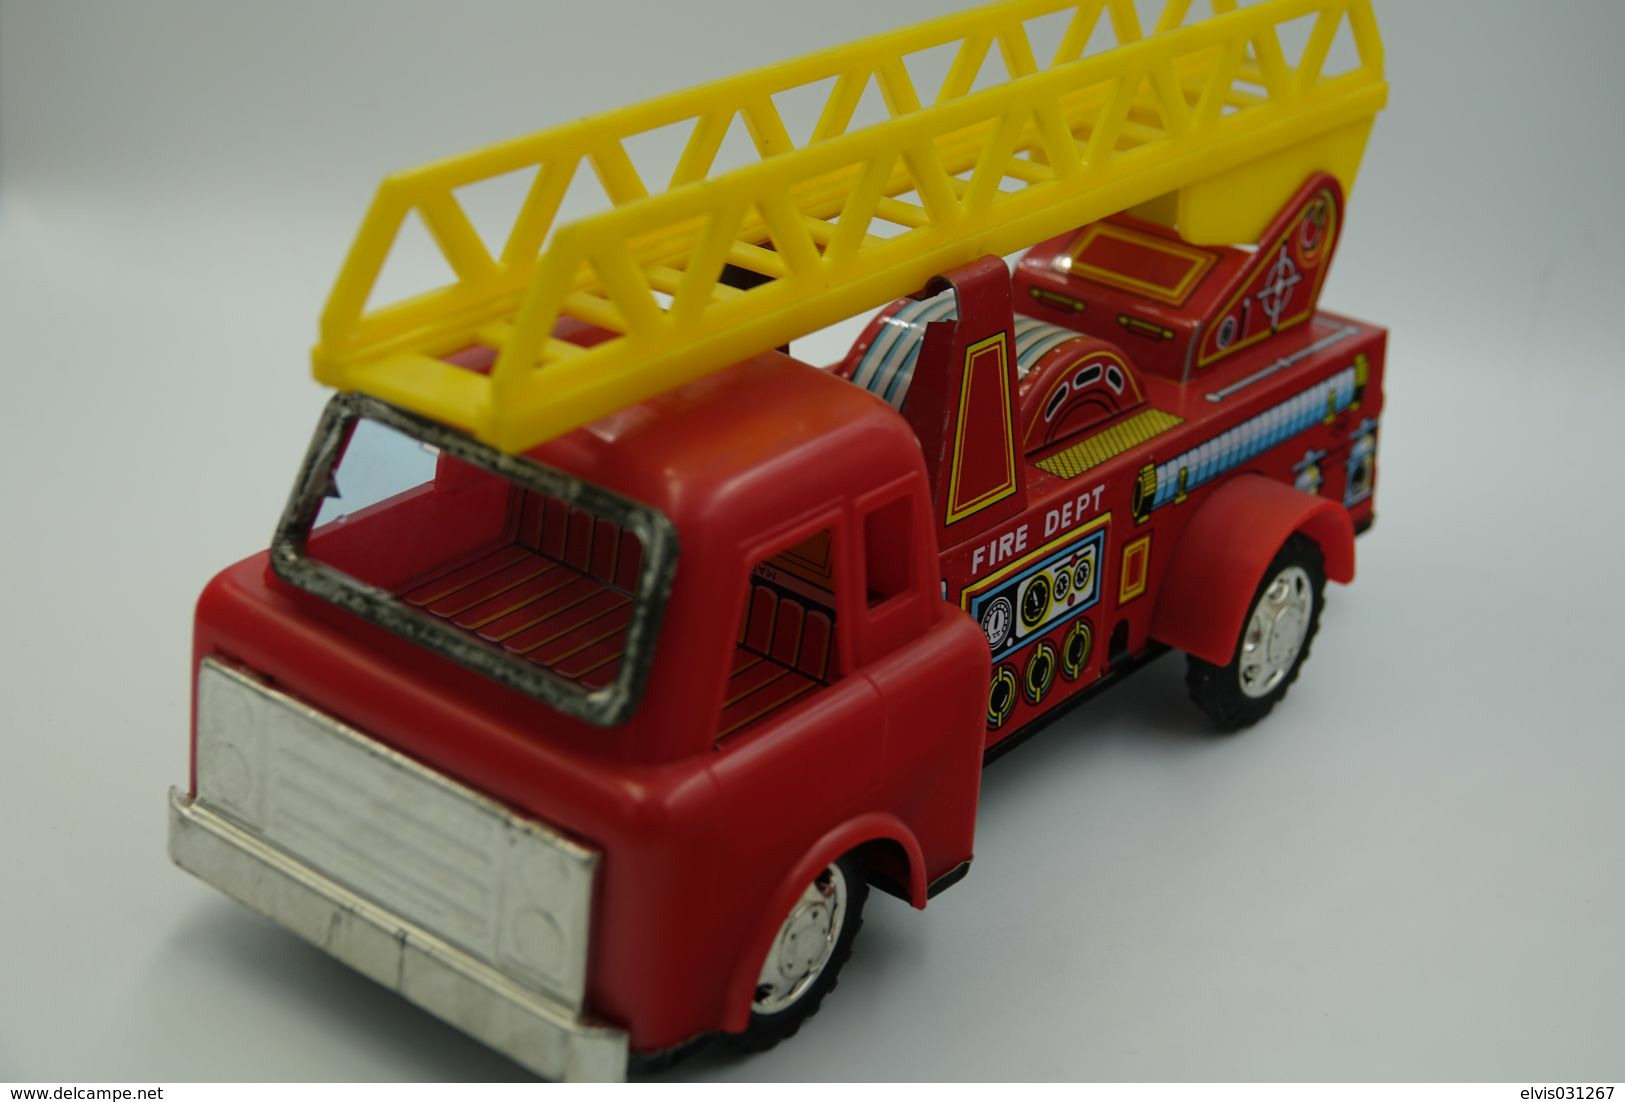 Vintage TIN TOY CAR : mark YONE with BOX - Fire Engine Truck 1057 - 22cm - Japan - 1960's - Friction Powered